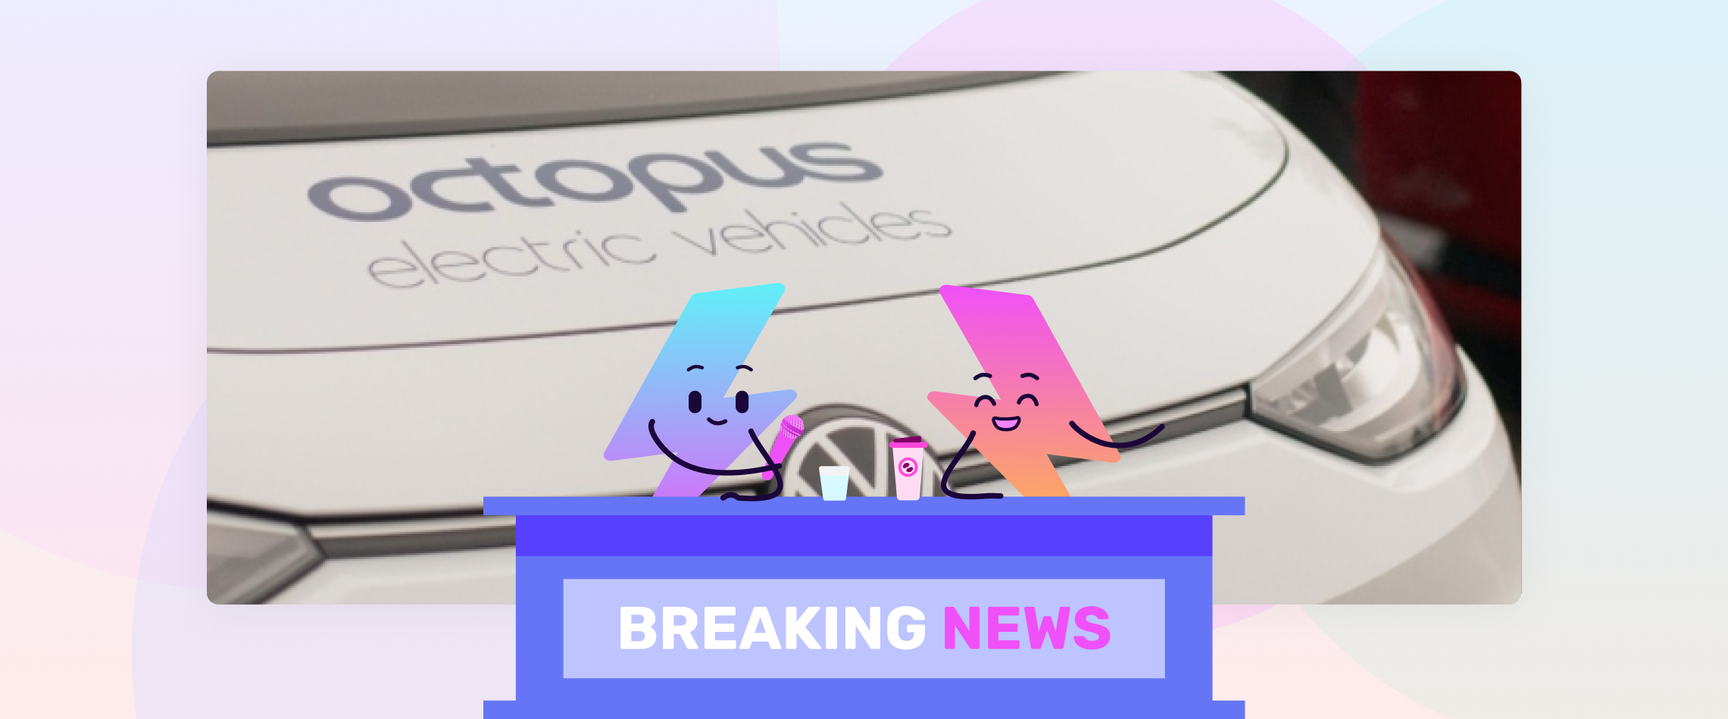 Banner image featuring an animated border of a breaking news desk and feature image of a white electric vehicle with octopus branding